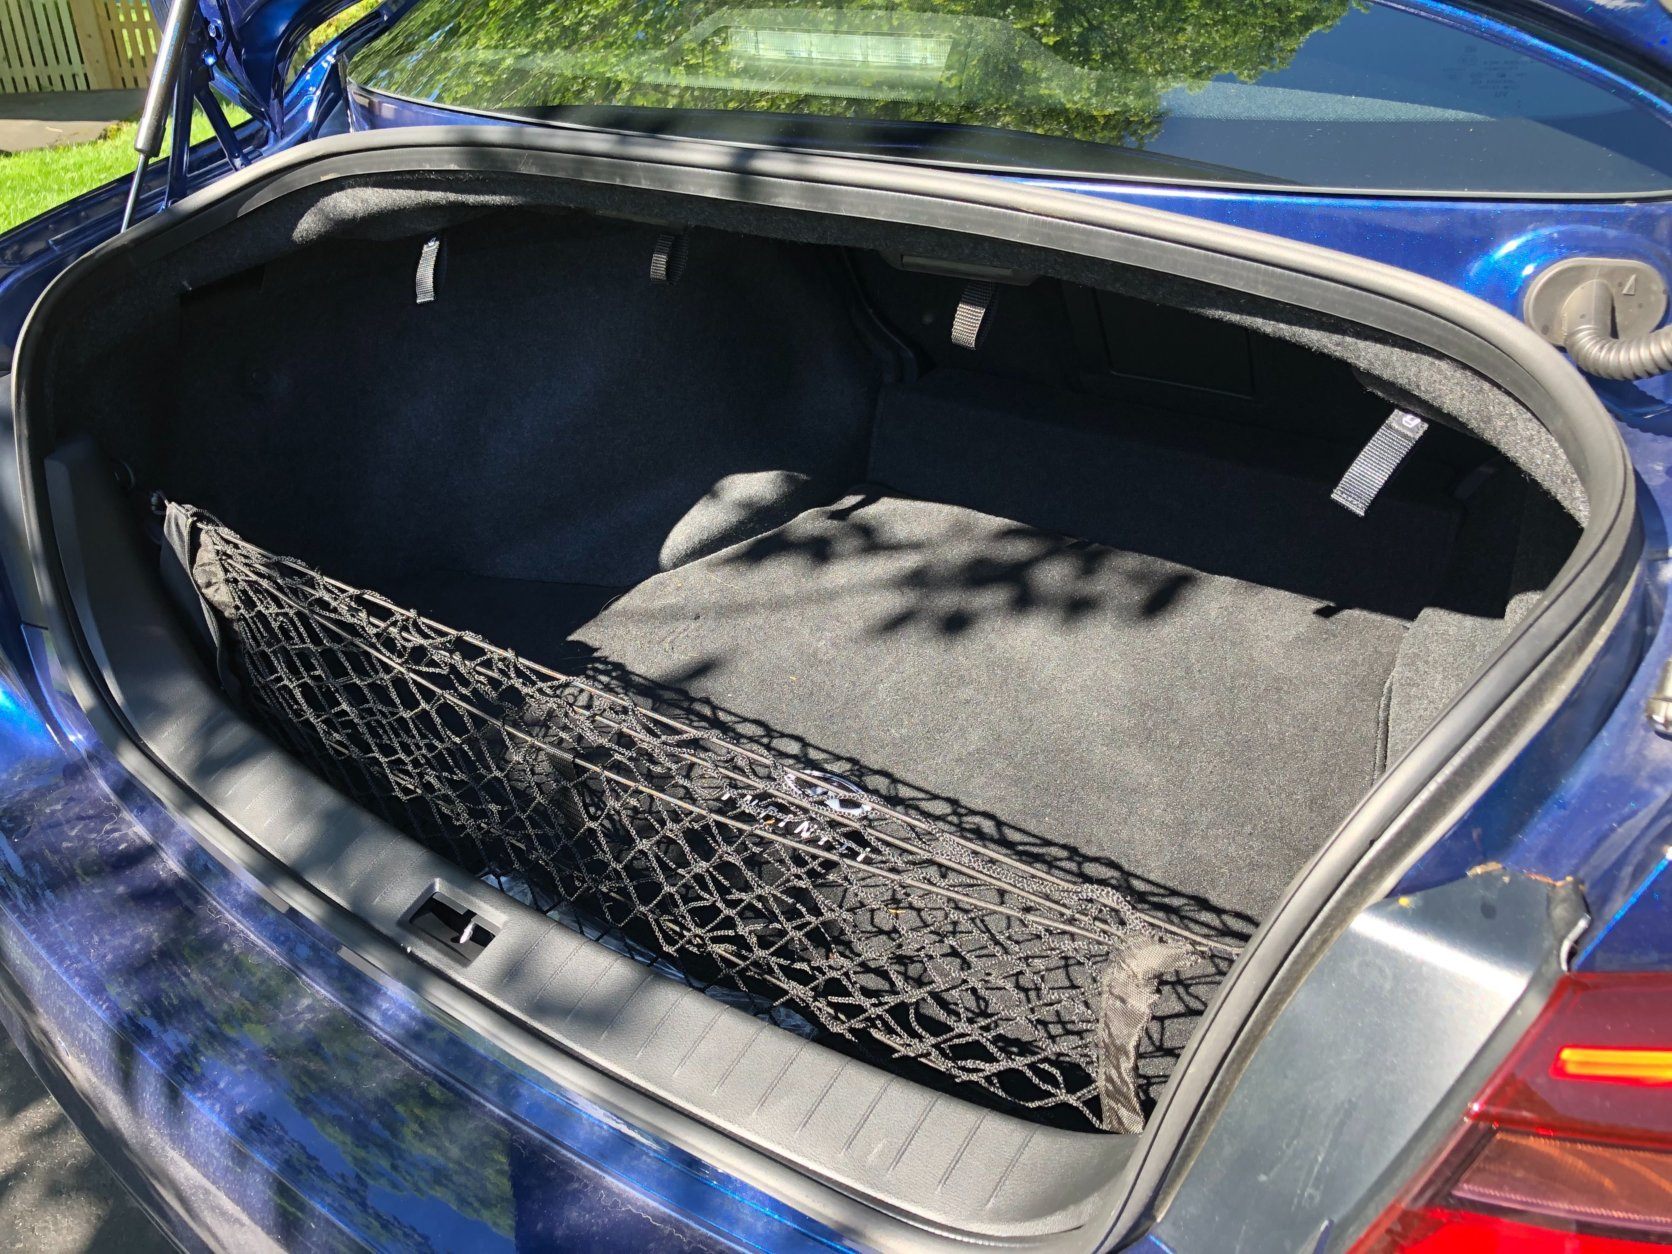 <p>There is plenty of space for storage in the larger trunk. I found this surprising considering the Q50 isn’t an overly-large sedan.</p>
